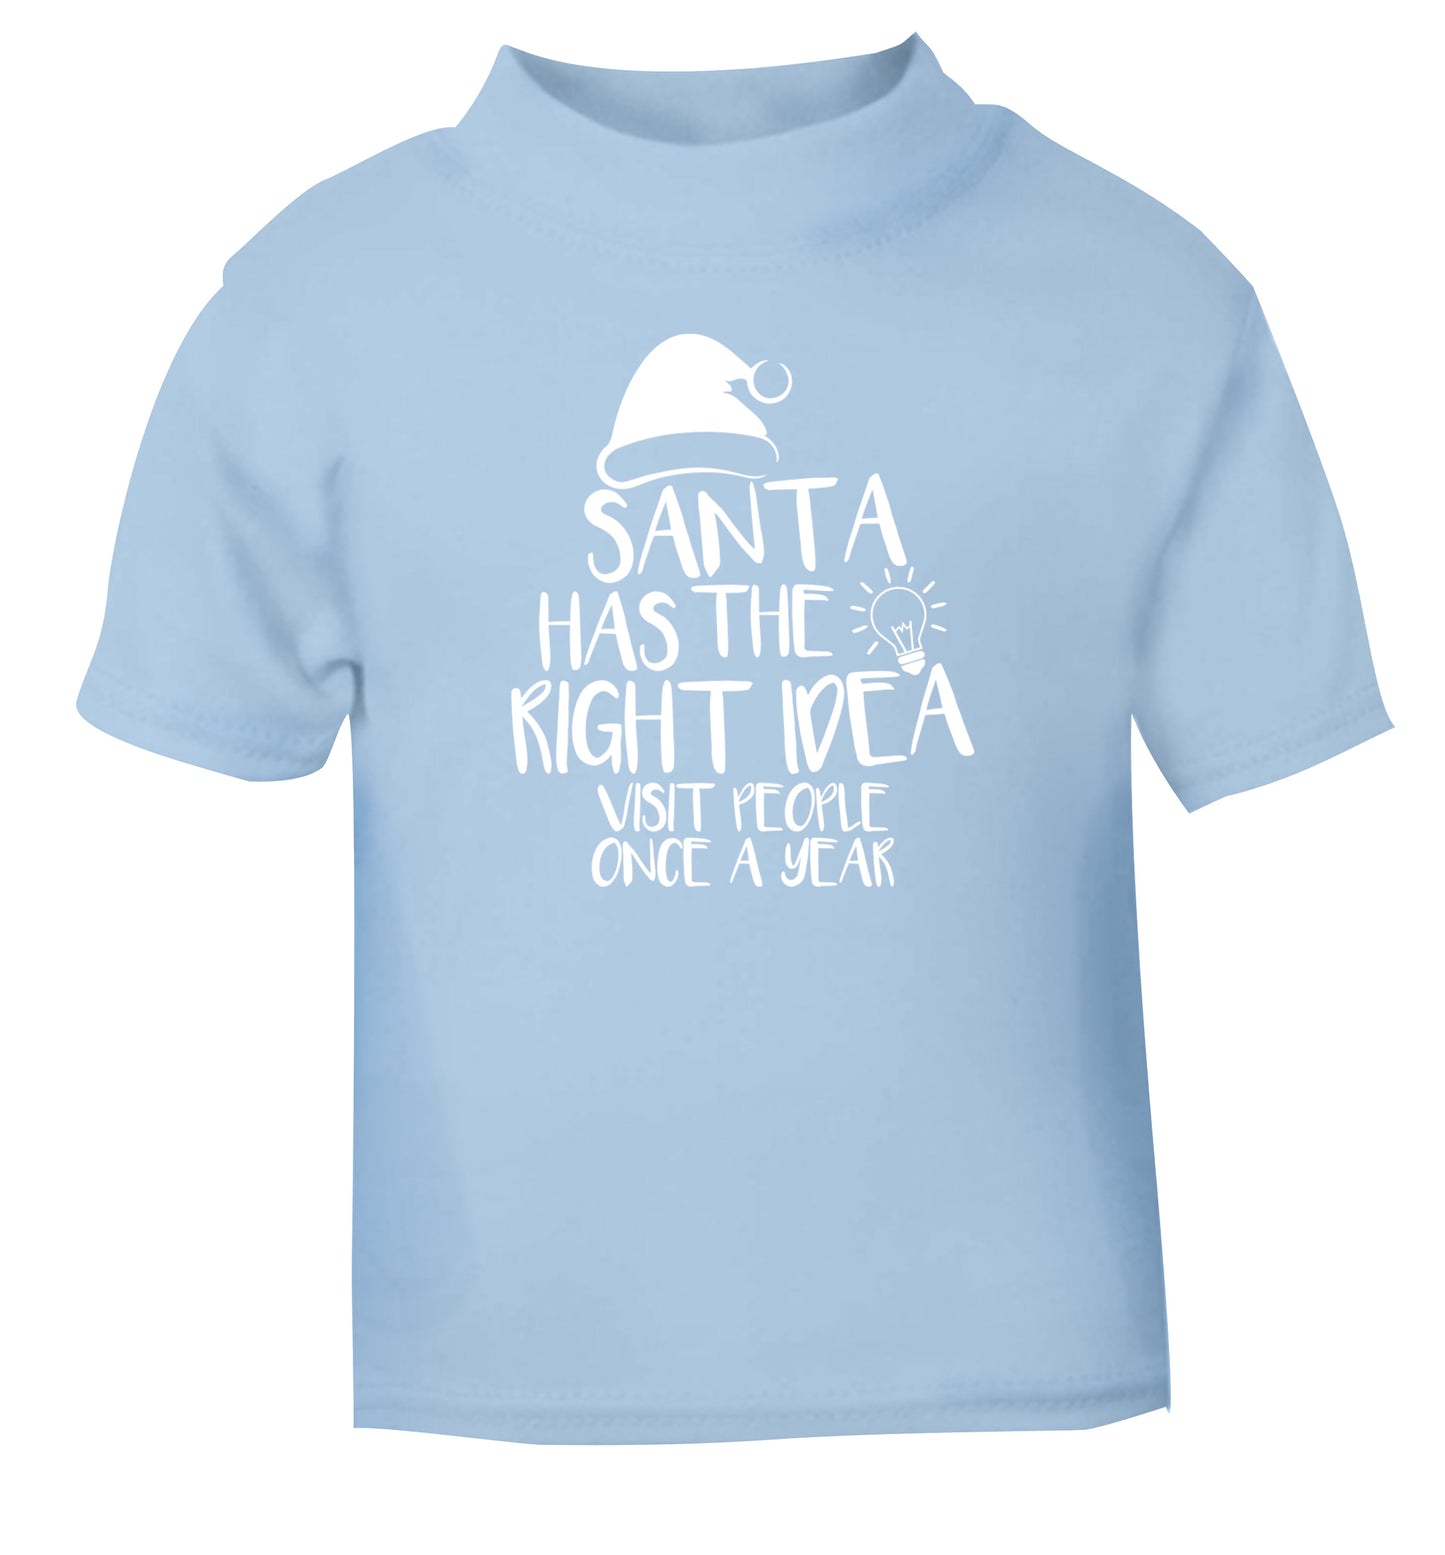 Santa has the right idea visit people once a year light blue Baby Toddler Tshirt 2 Years